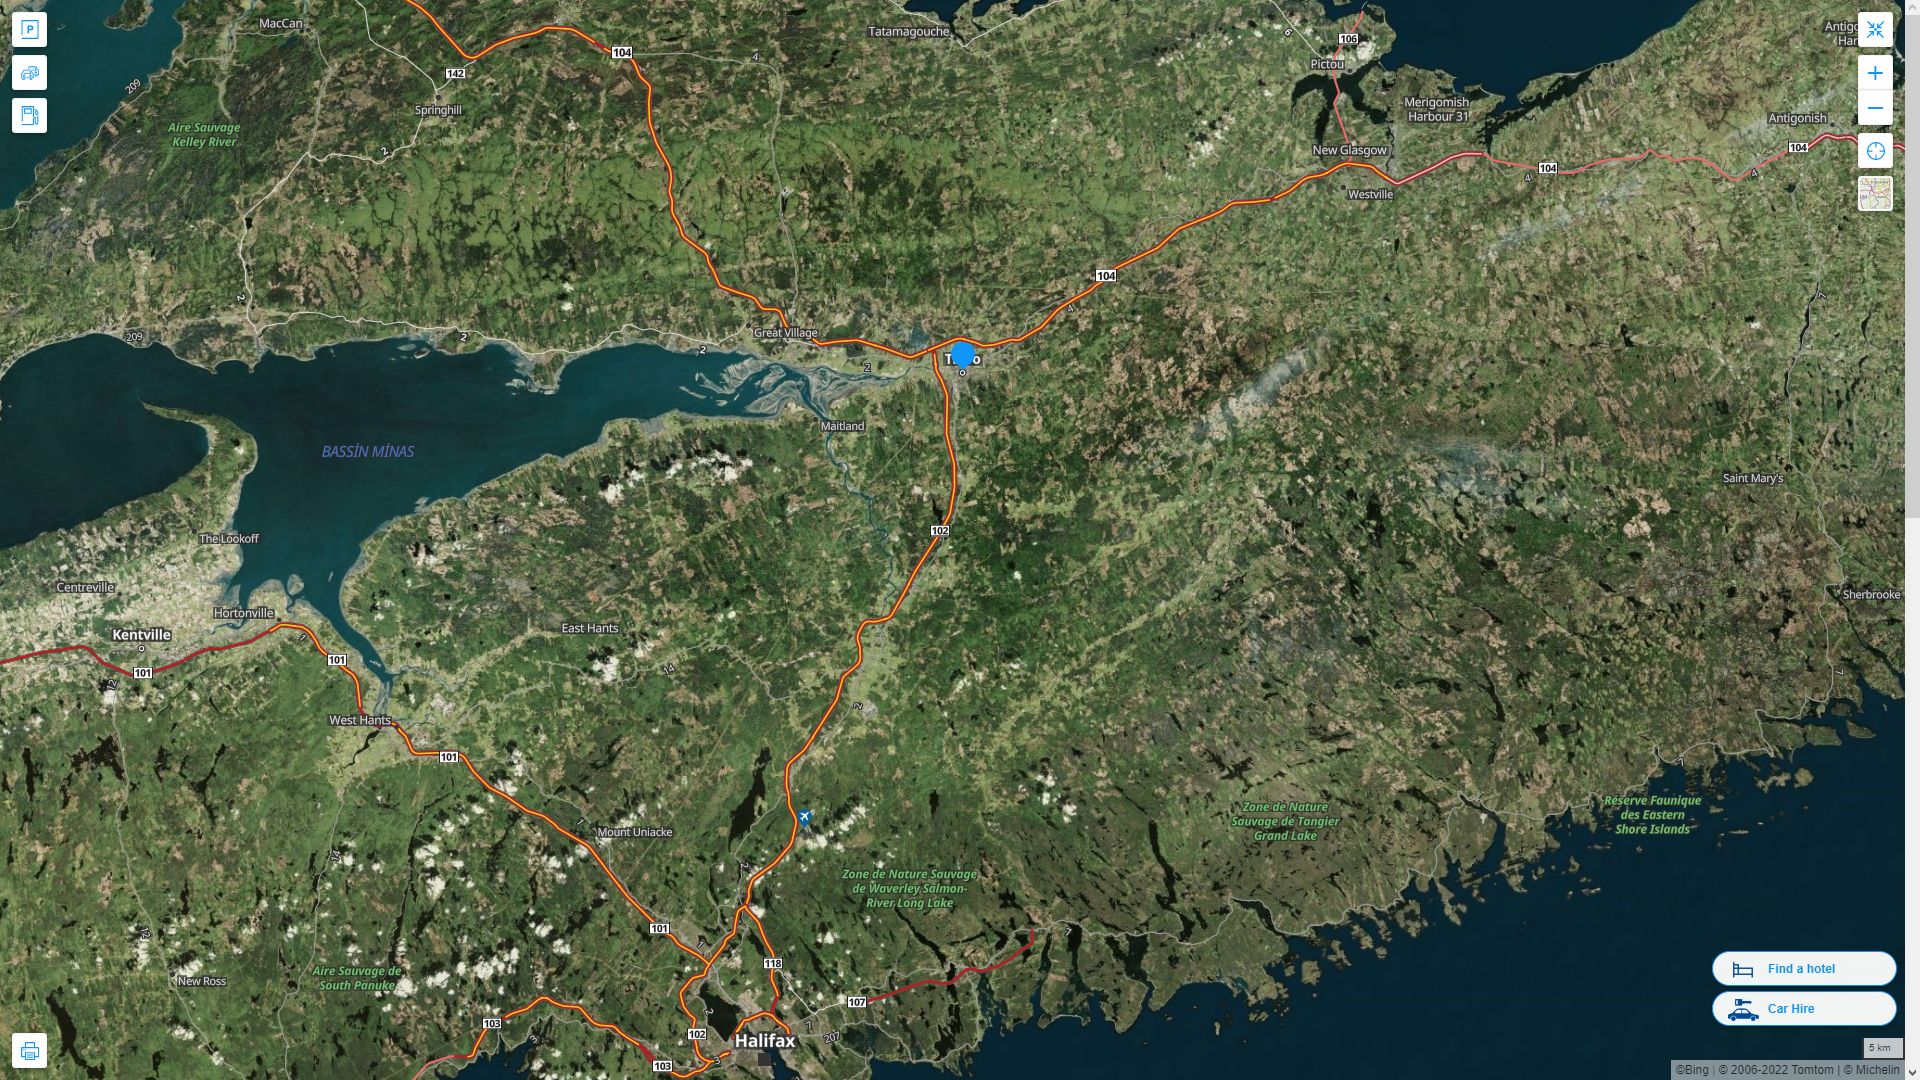 Truro Highway and Road Map with Satellite View